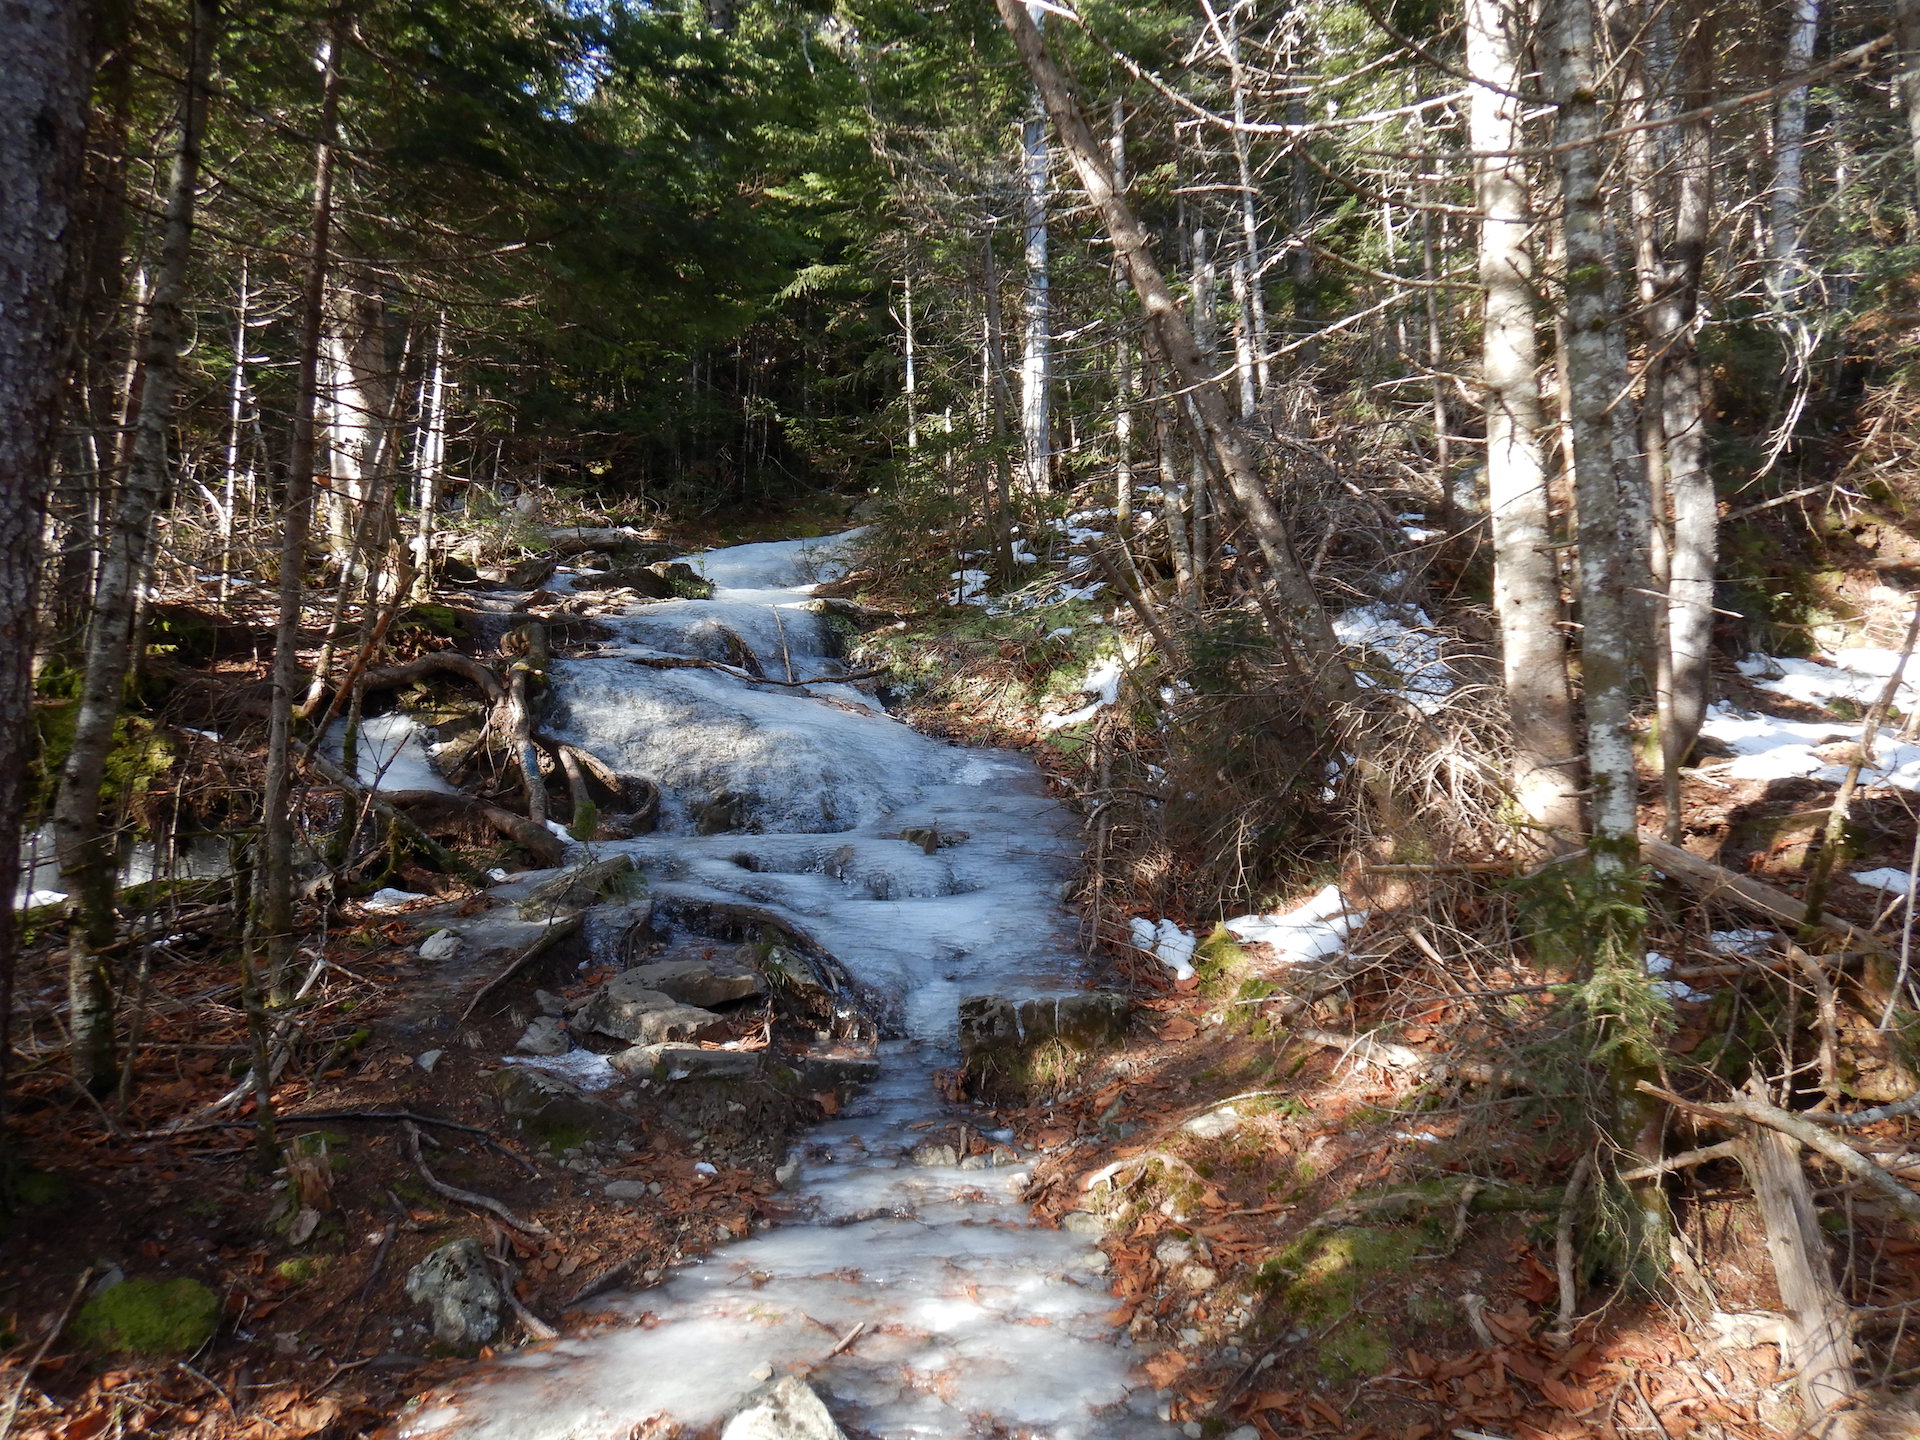 A trail ascends through a thick forest. The trees are generally less than 6 inches in diameter and grow closely together. The trail is covered in ice like a steep stream that has frozen. About 30-40 feet of the trail is visible before it disappears at center.